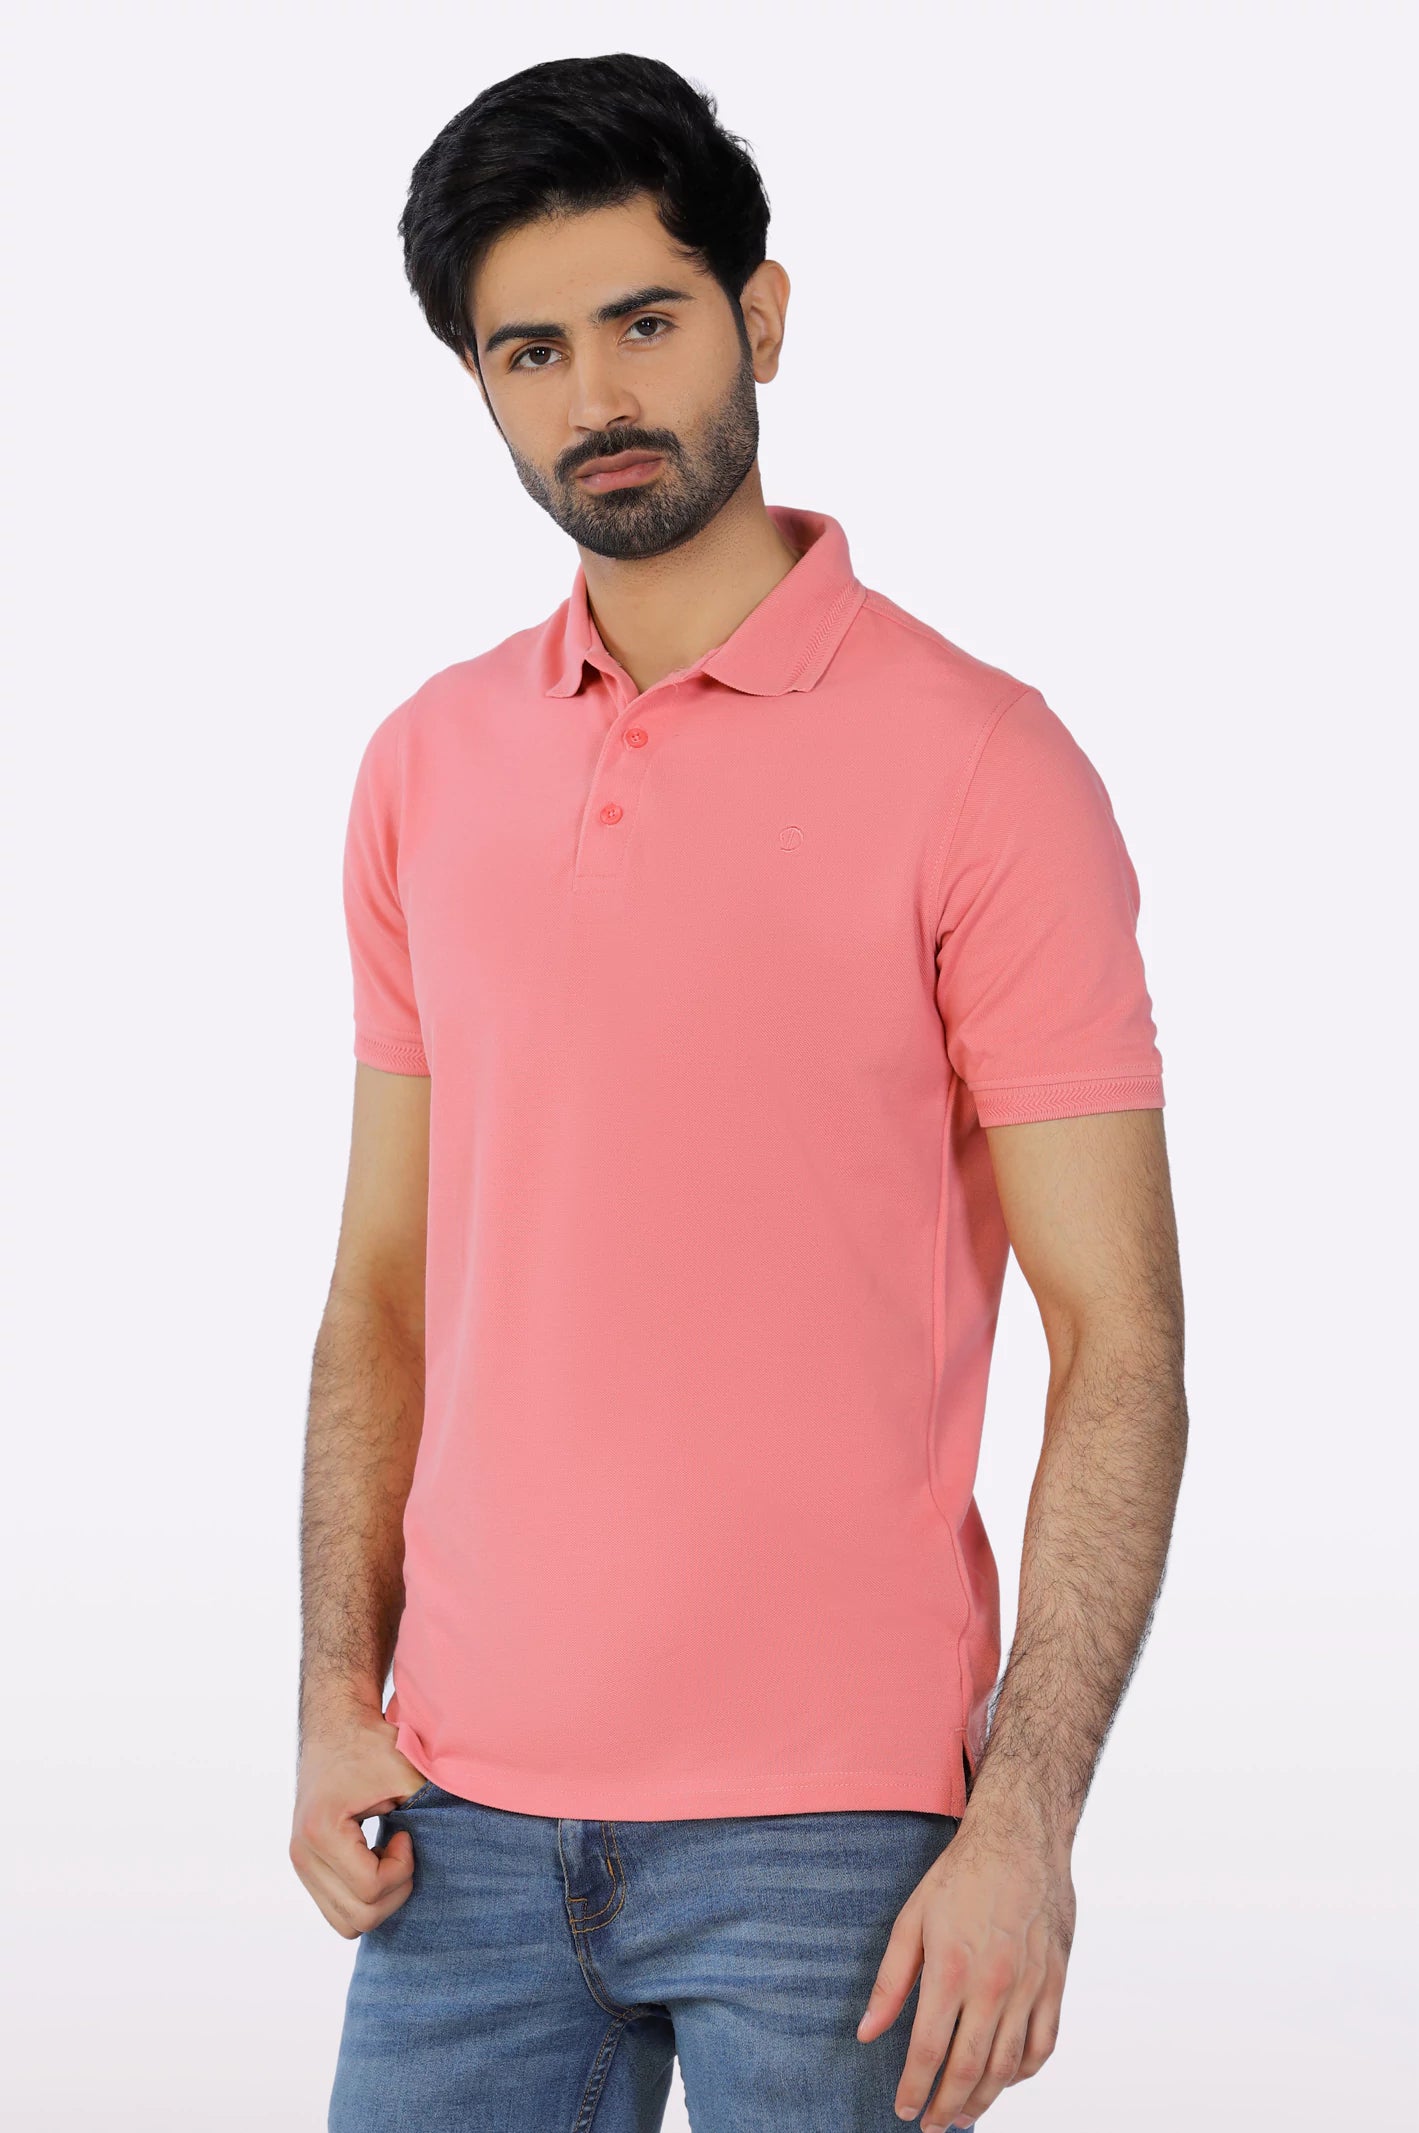 Peach Jacquard Collar Polo From Diners